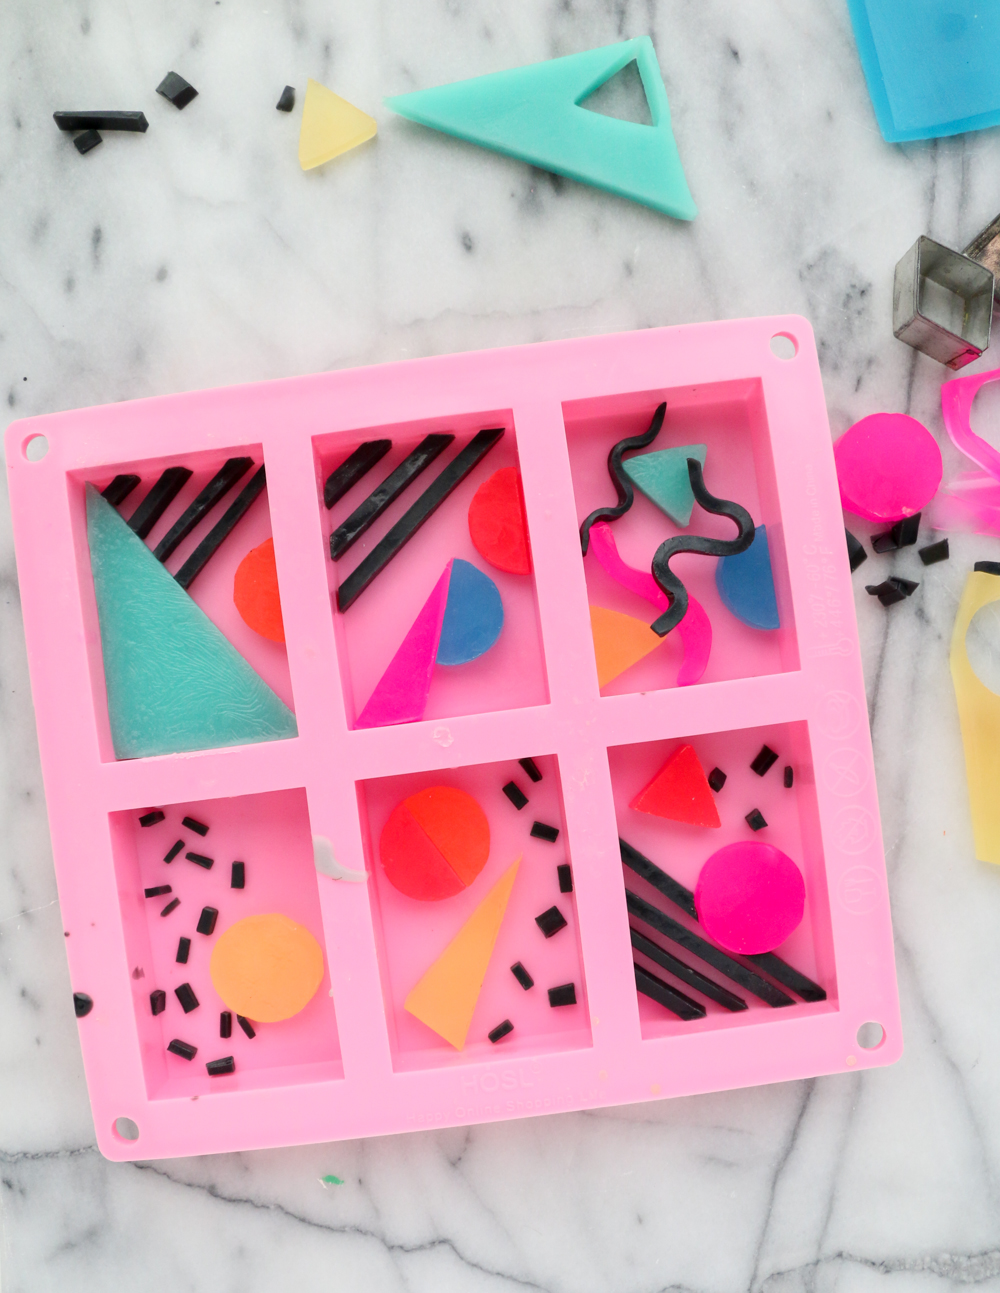 How to Make 80's Inspired Soap Bars